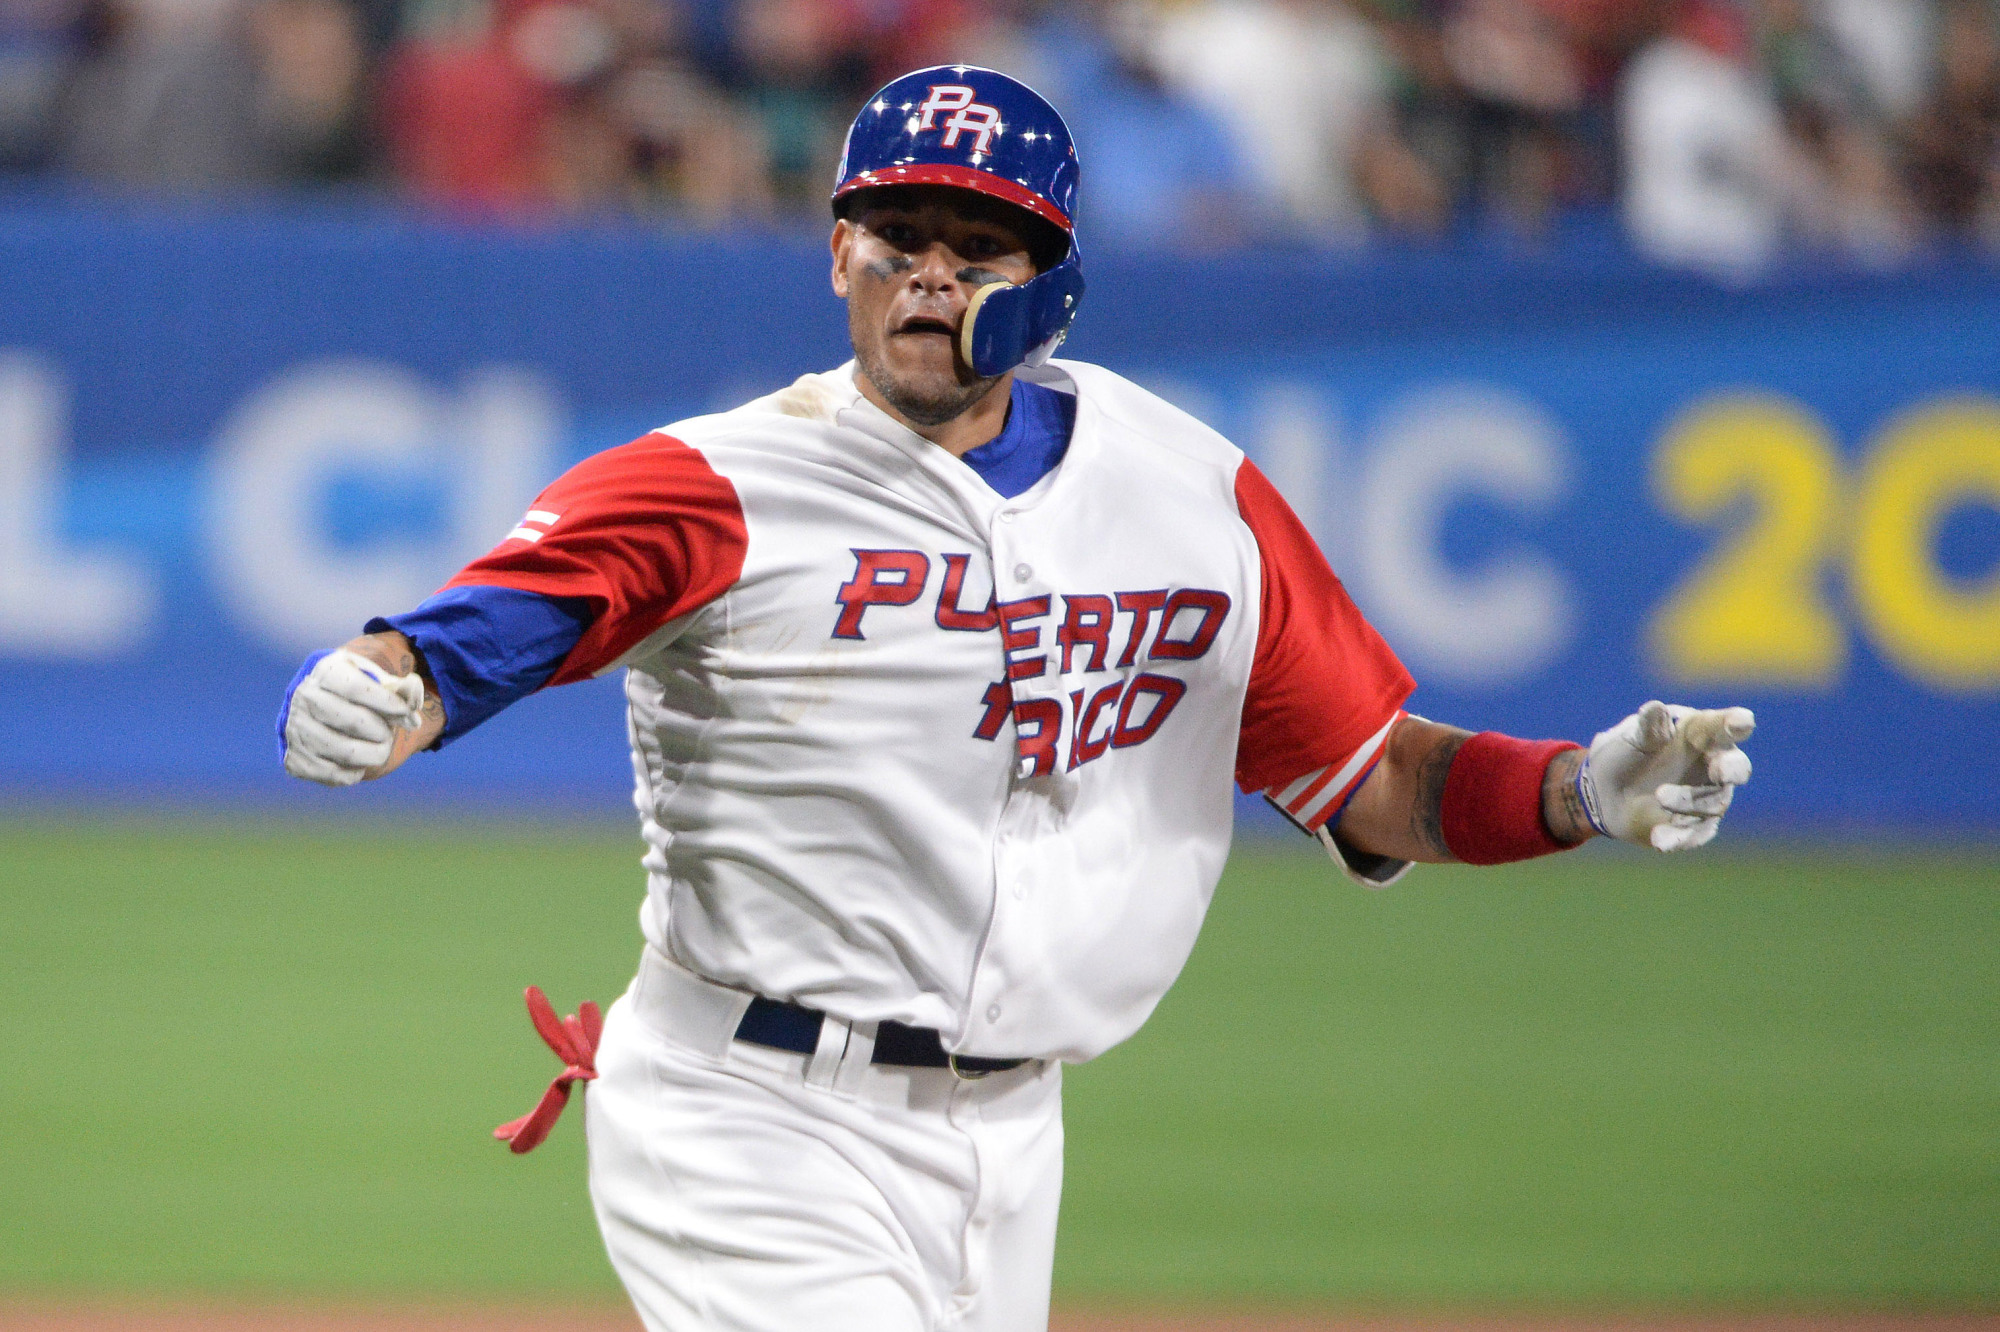 USA eliminated from World Baseball Classic by Puerto Rico